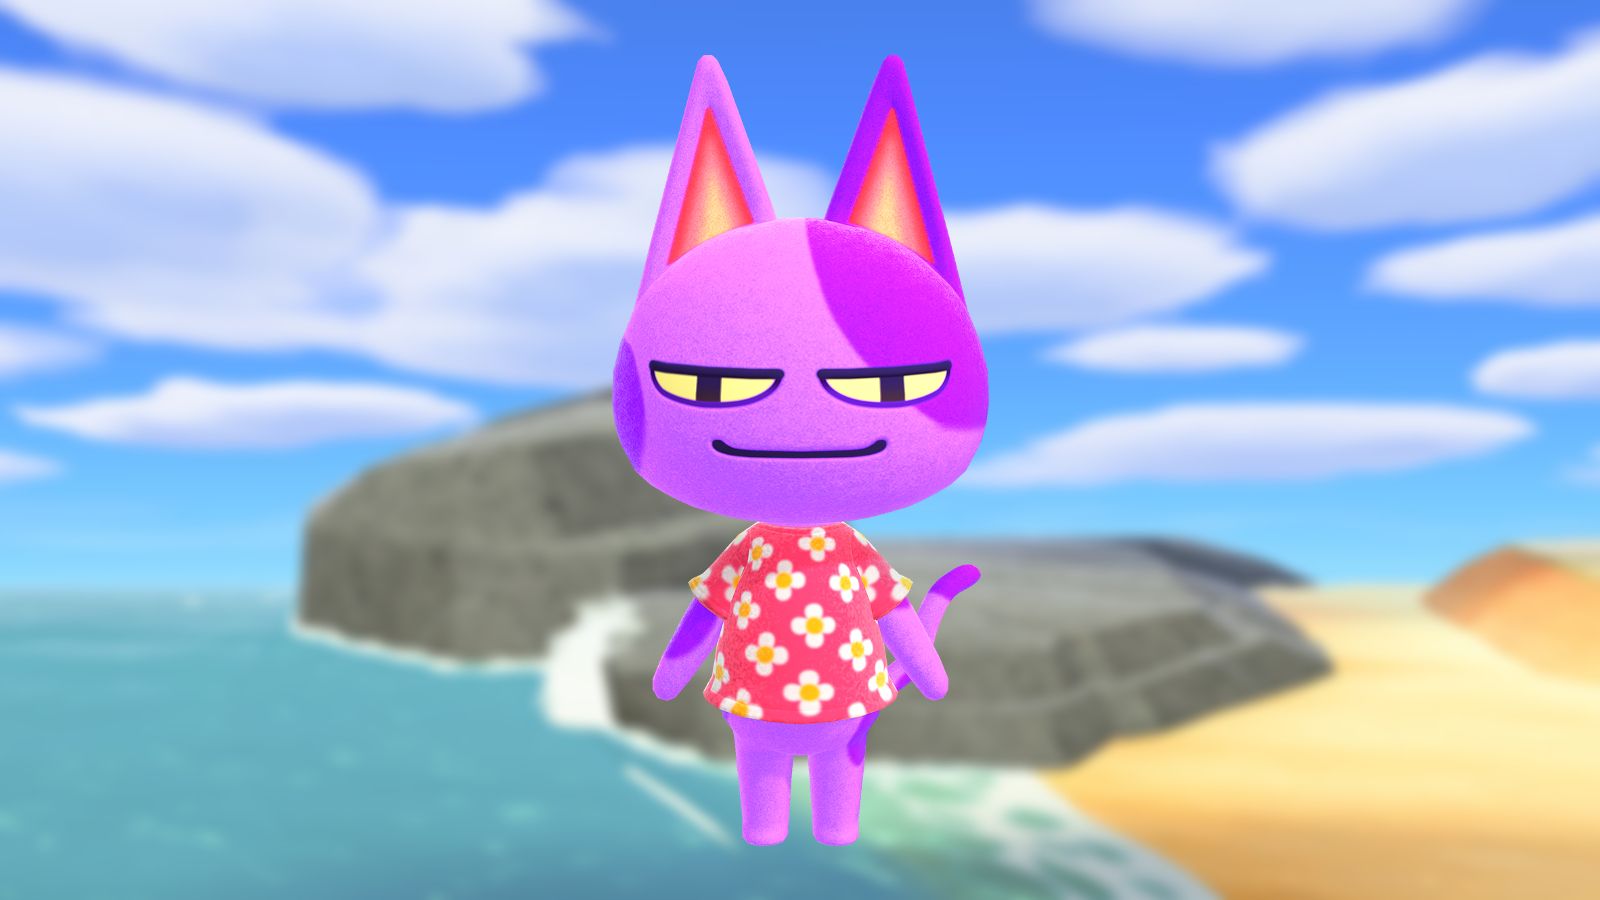 Bob was Animal Crossing's first villager.